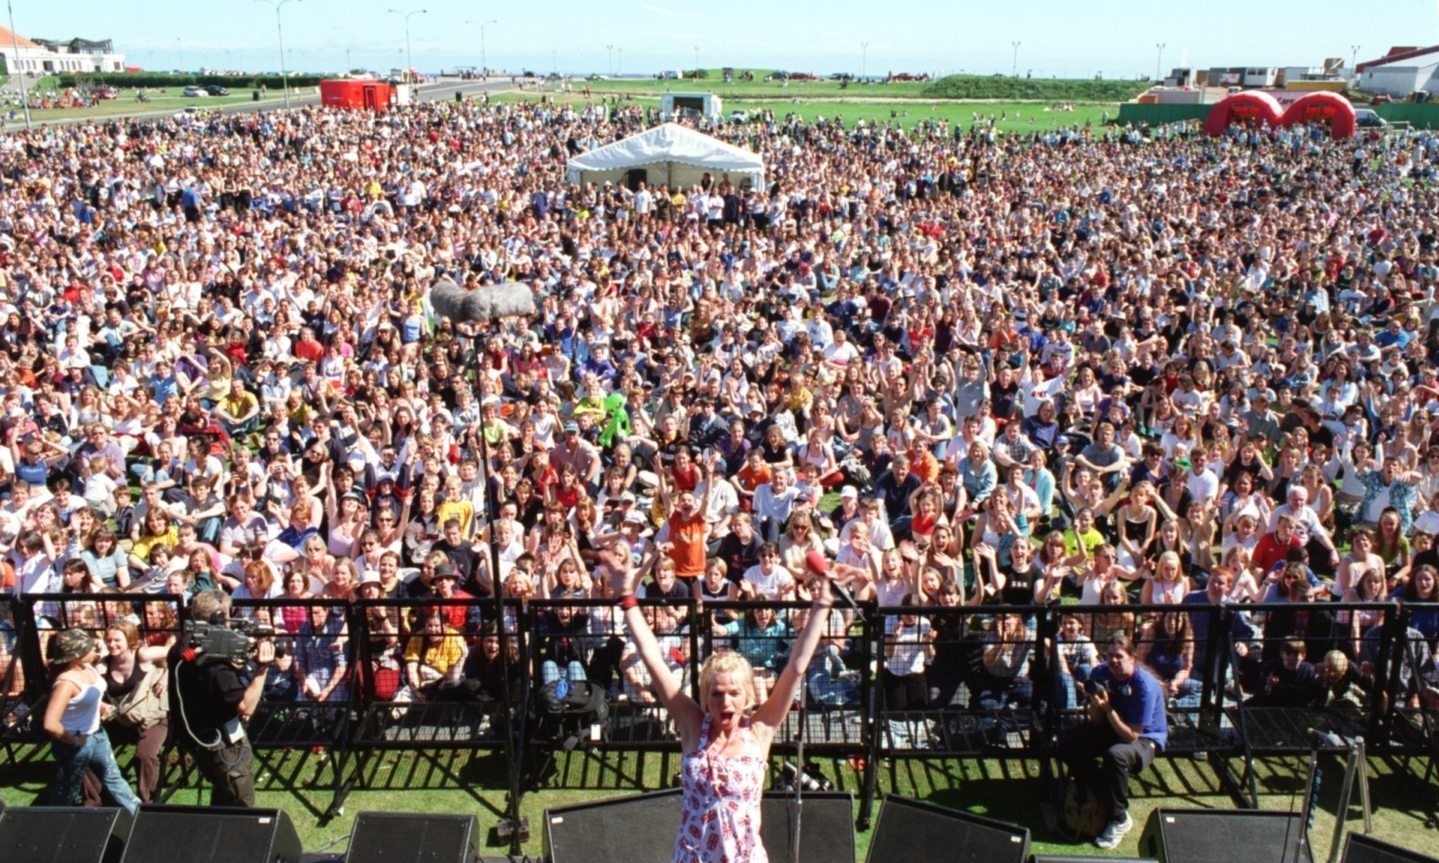 Aberdeen screamed its way across the airwaves when Radio 1's golden girl Zoe Ball kicked off the summer roadshow at the Beach in July 1999. Around 10,000 noisy punters lapped up the bubbly DJ's every word and wave.